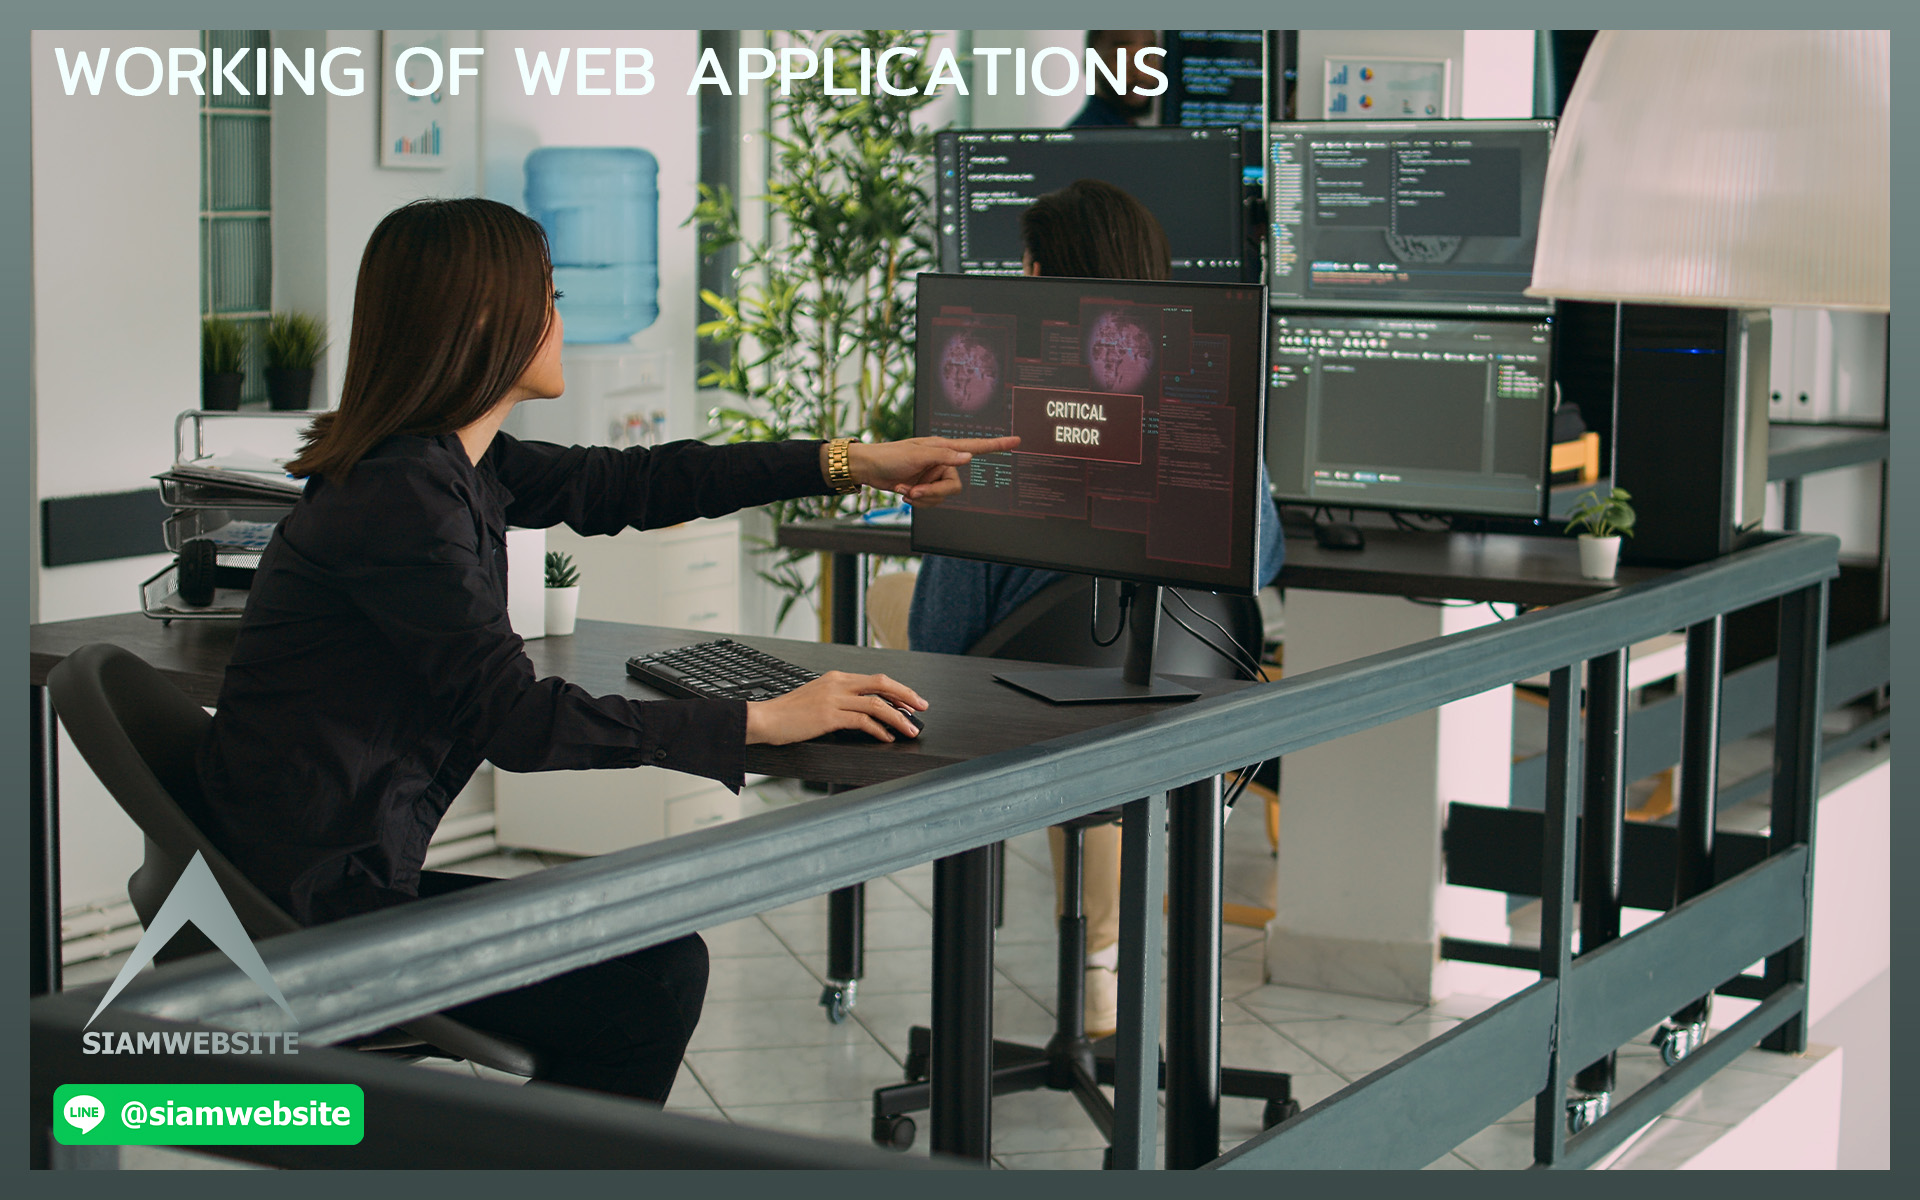 Working of Web Applications